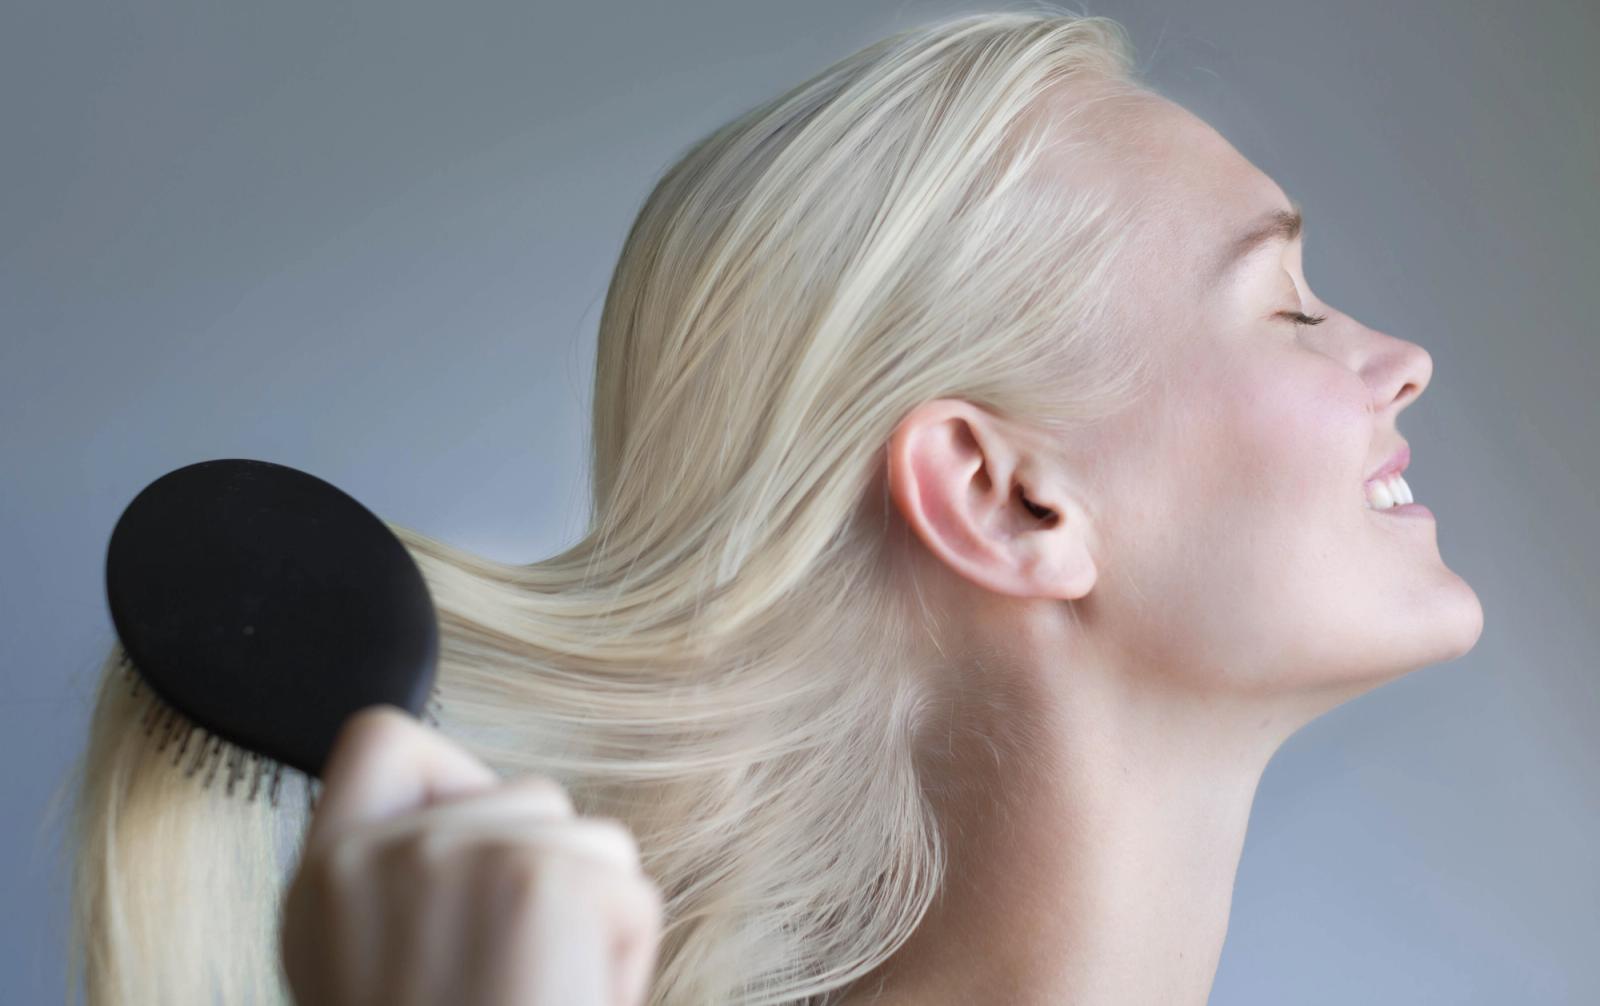 How To Fix Brassy Hair With These Products - Nexxus US